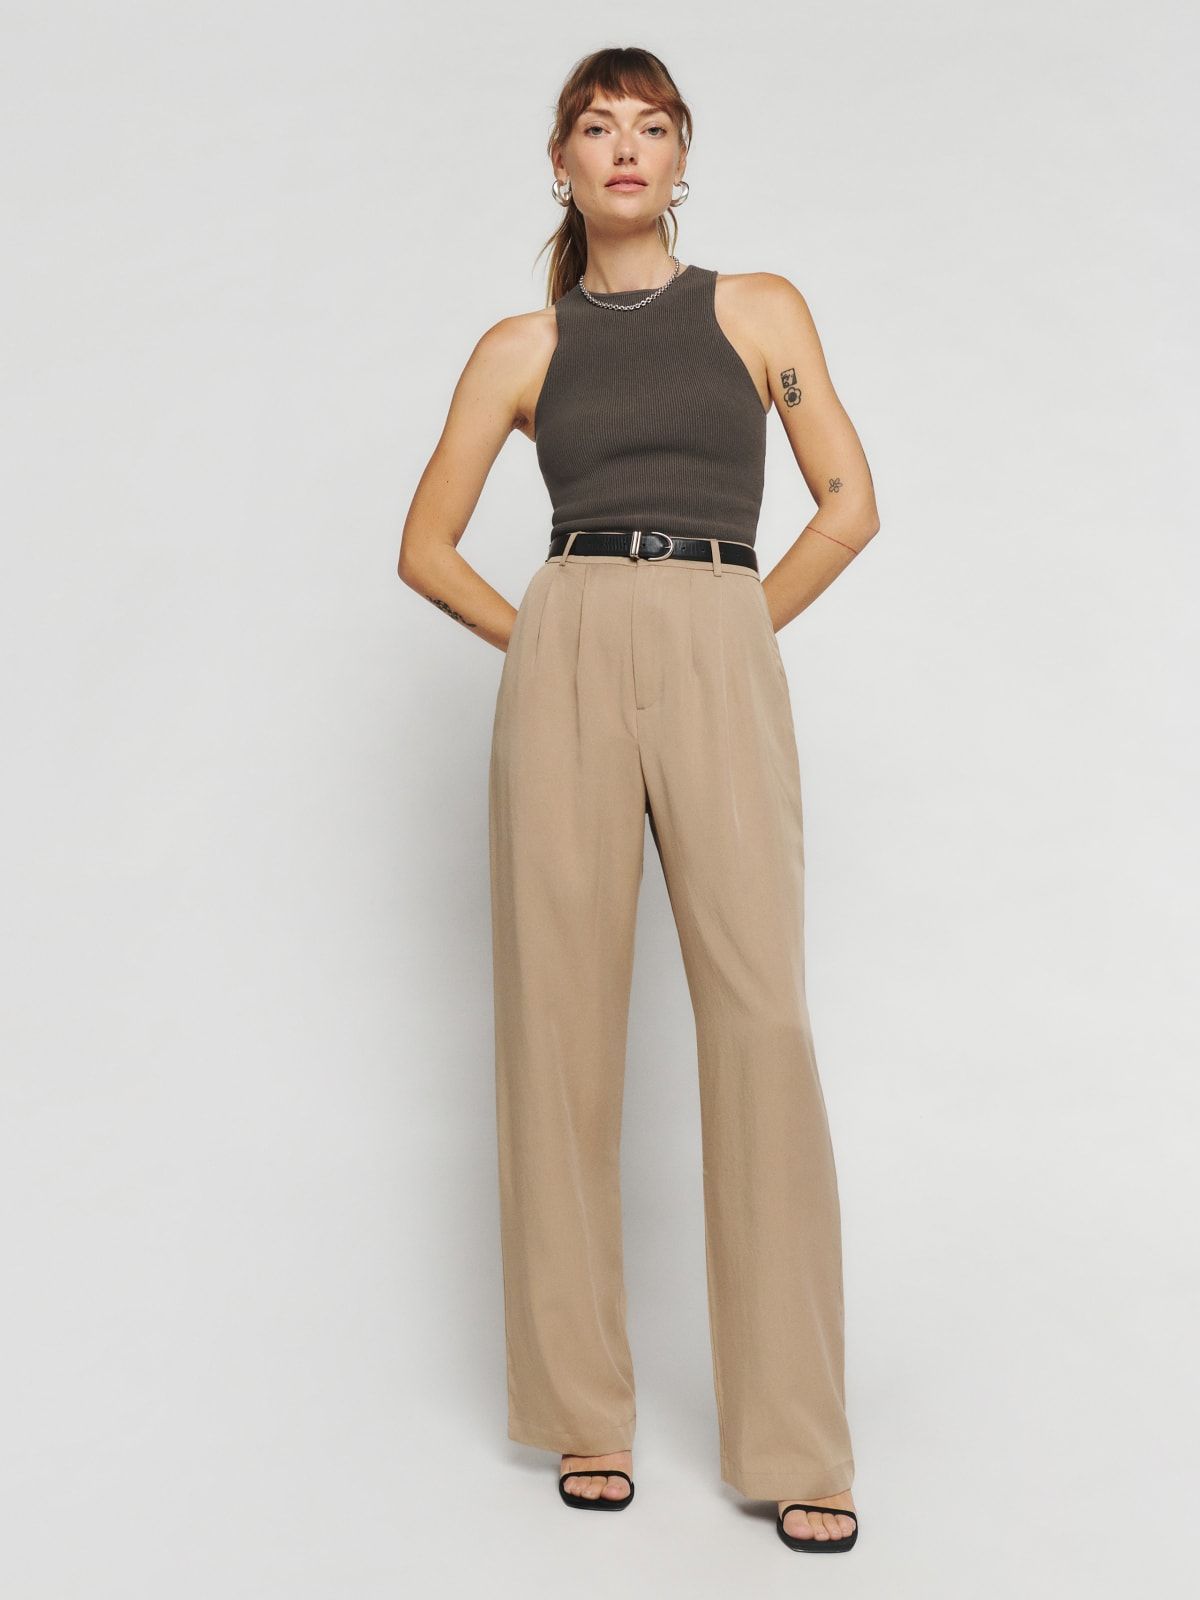 womens lightweight trousers for hot countries